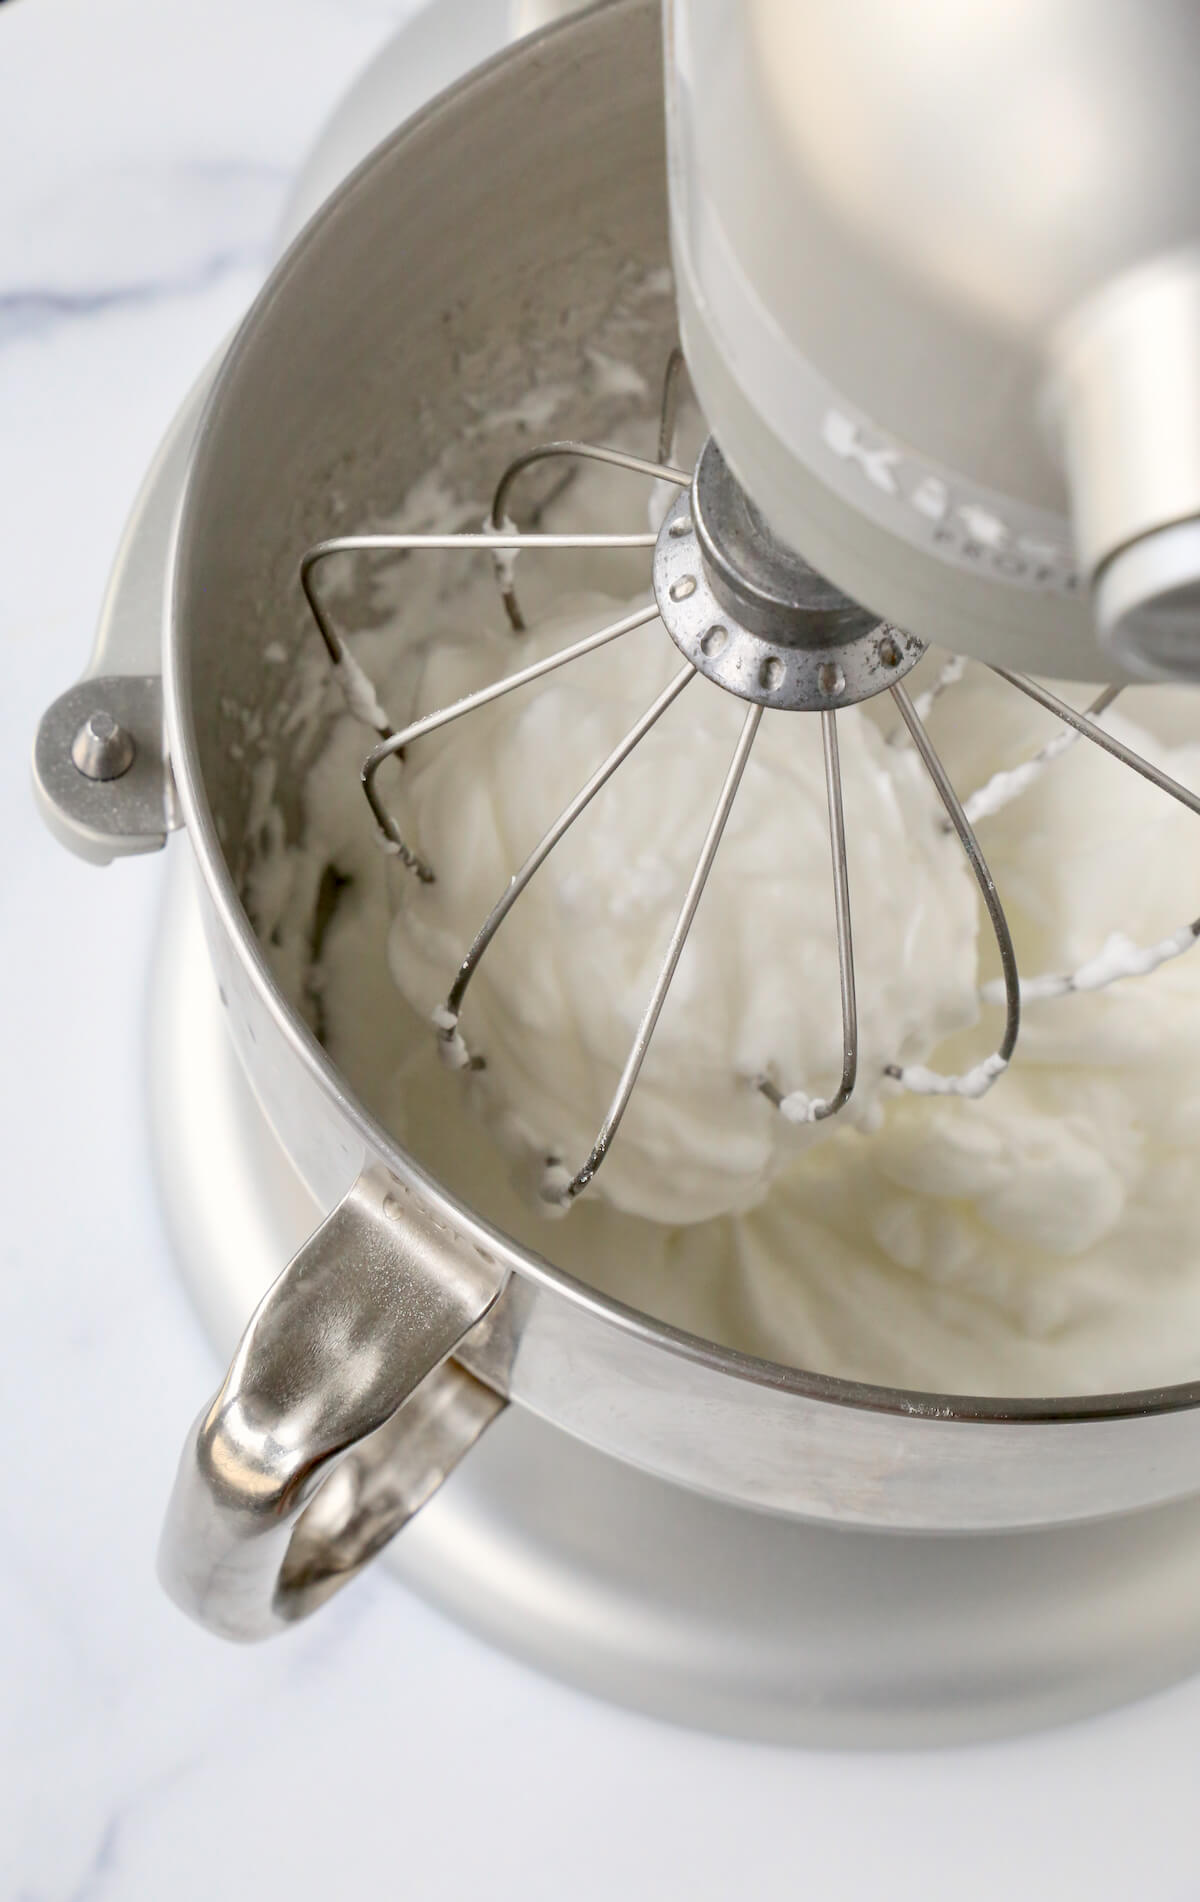 A mixing bowl with whisk attachment and meringue in the bowl.